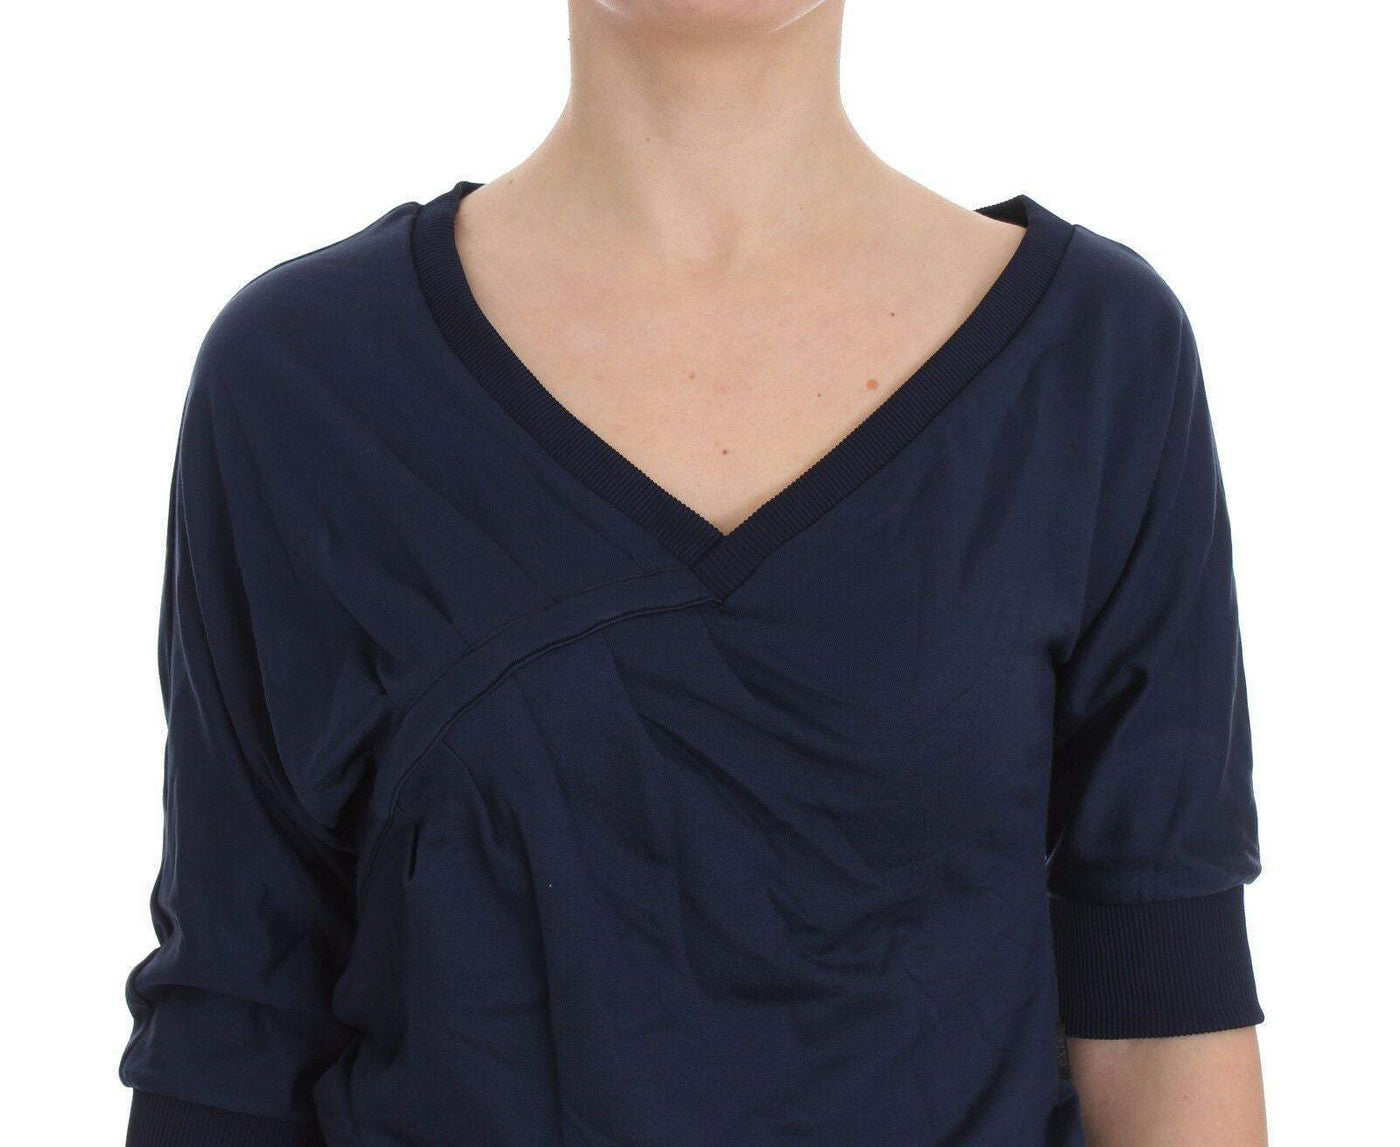 Exte Blue Cotton Top Pullover Deep V-neck Women Sweater #women, Blue, Exte, feed-agegroup-adult, feed-color-blue, feed-gender-female, IT40|S, Tops & T-Shirts - Women - Clothing, Women - New Arrivals at SEYMAYKA